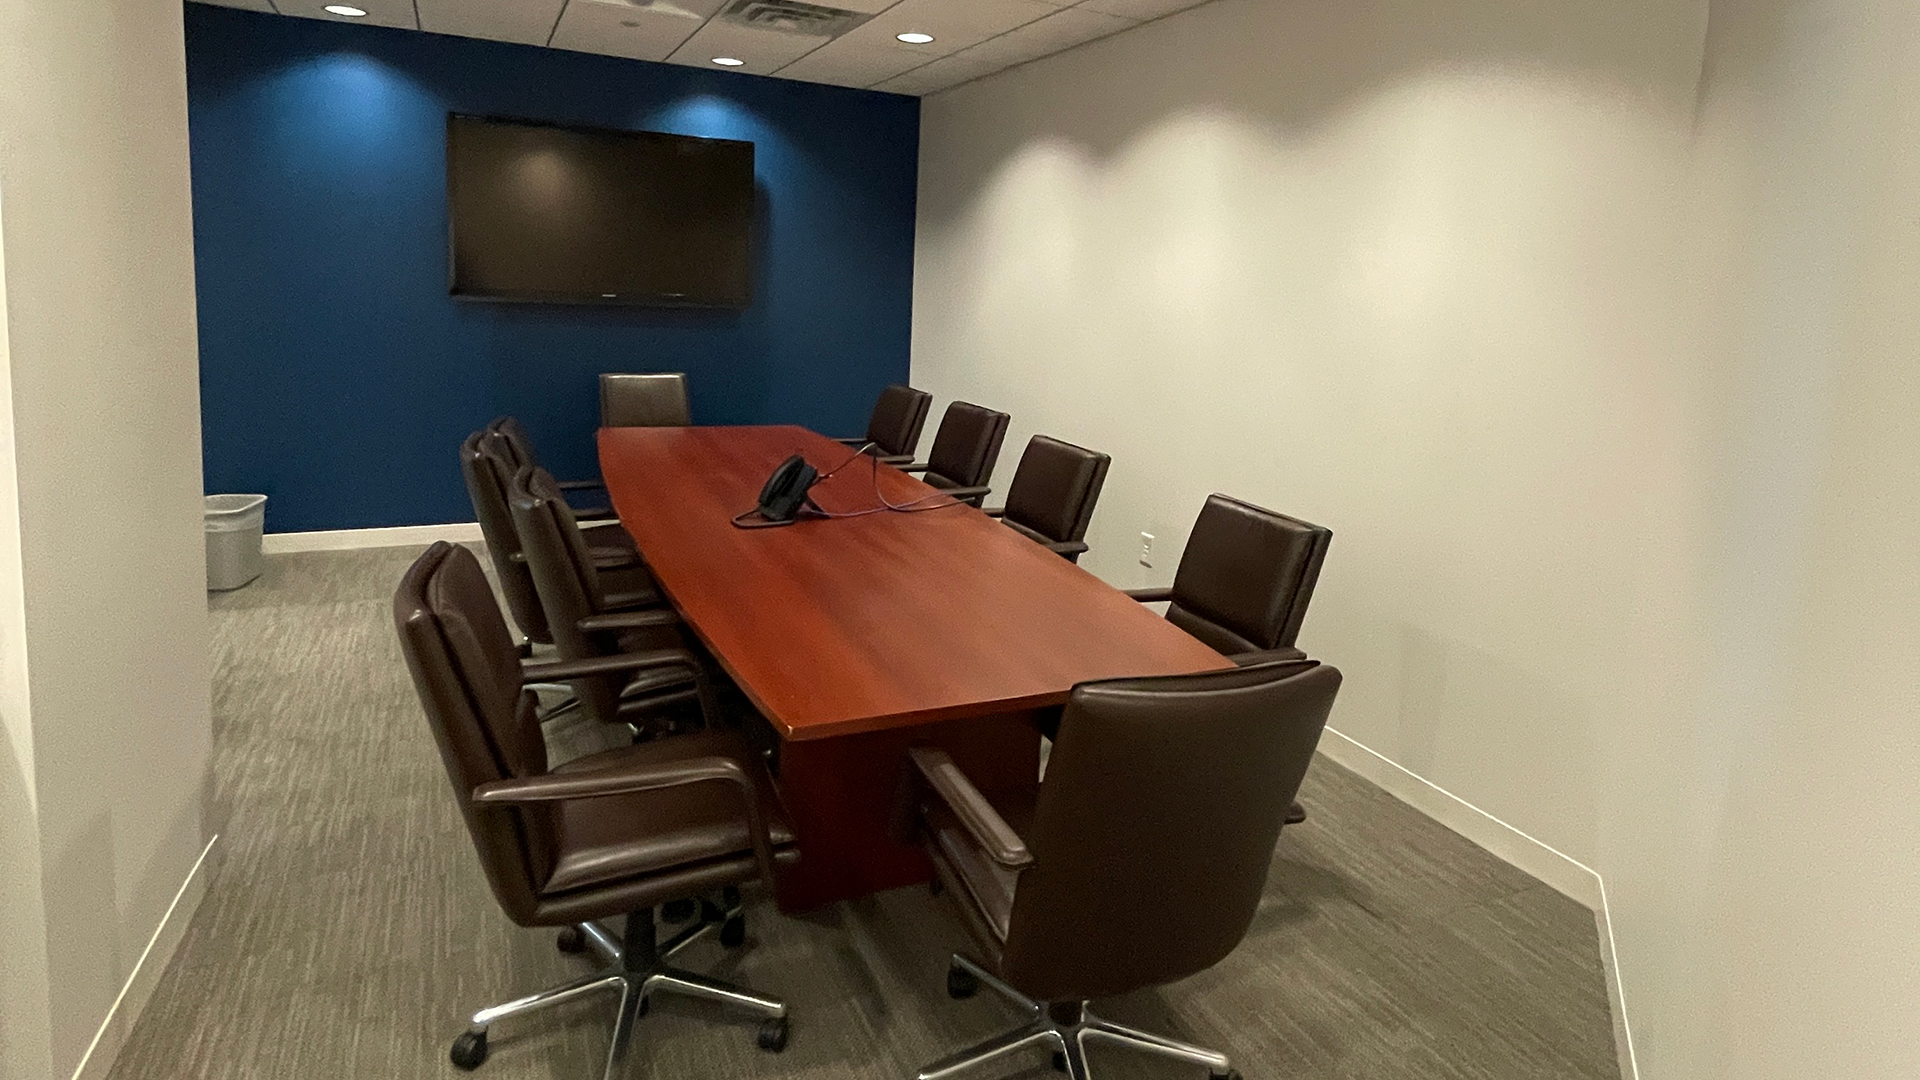 Second Conference room Image